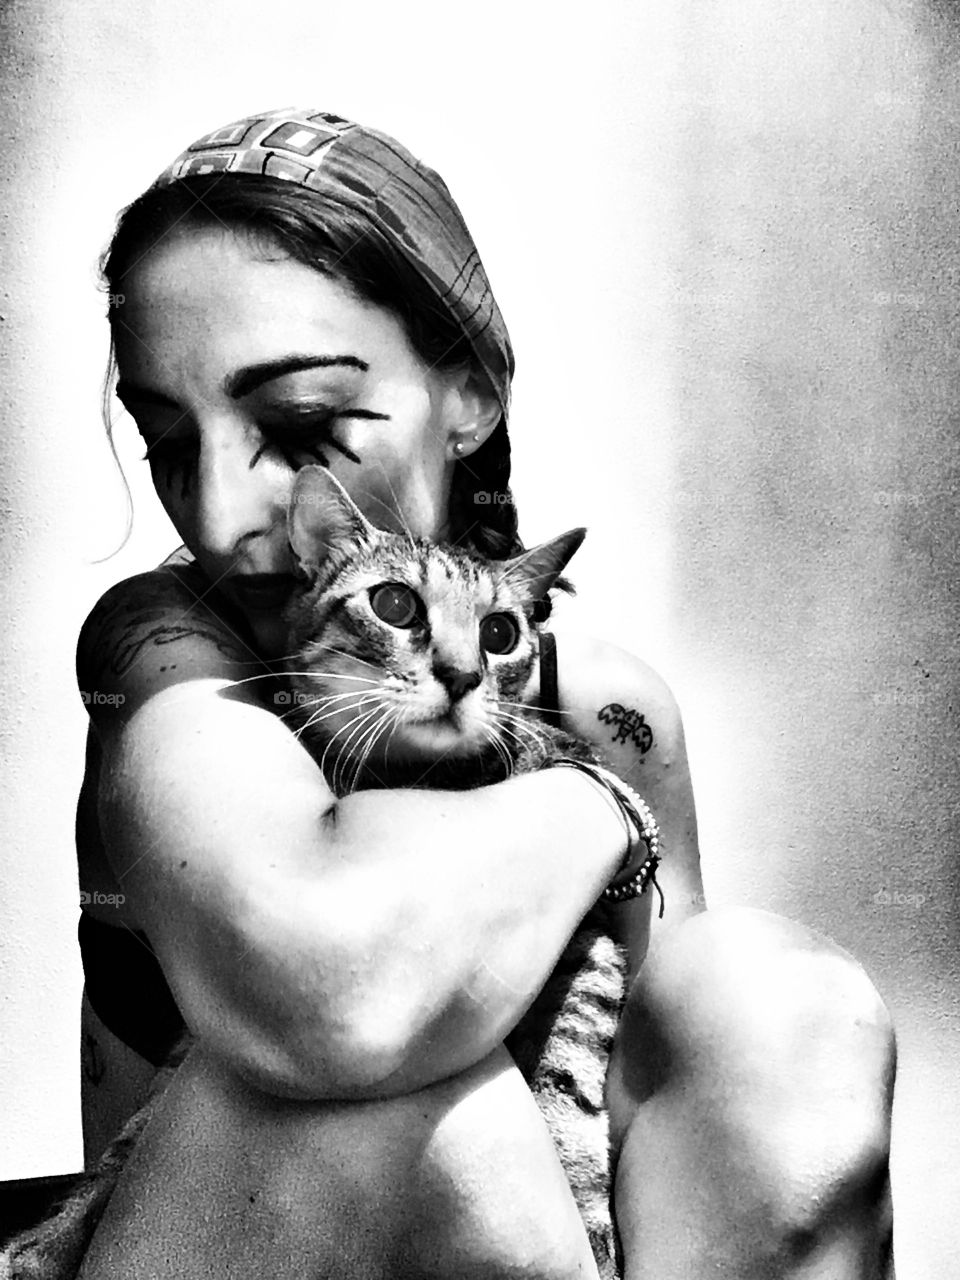 Black and white portrait with cat